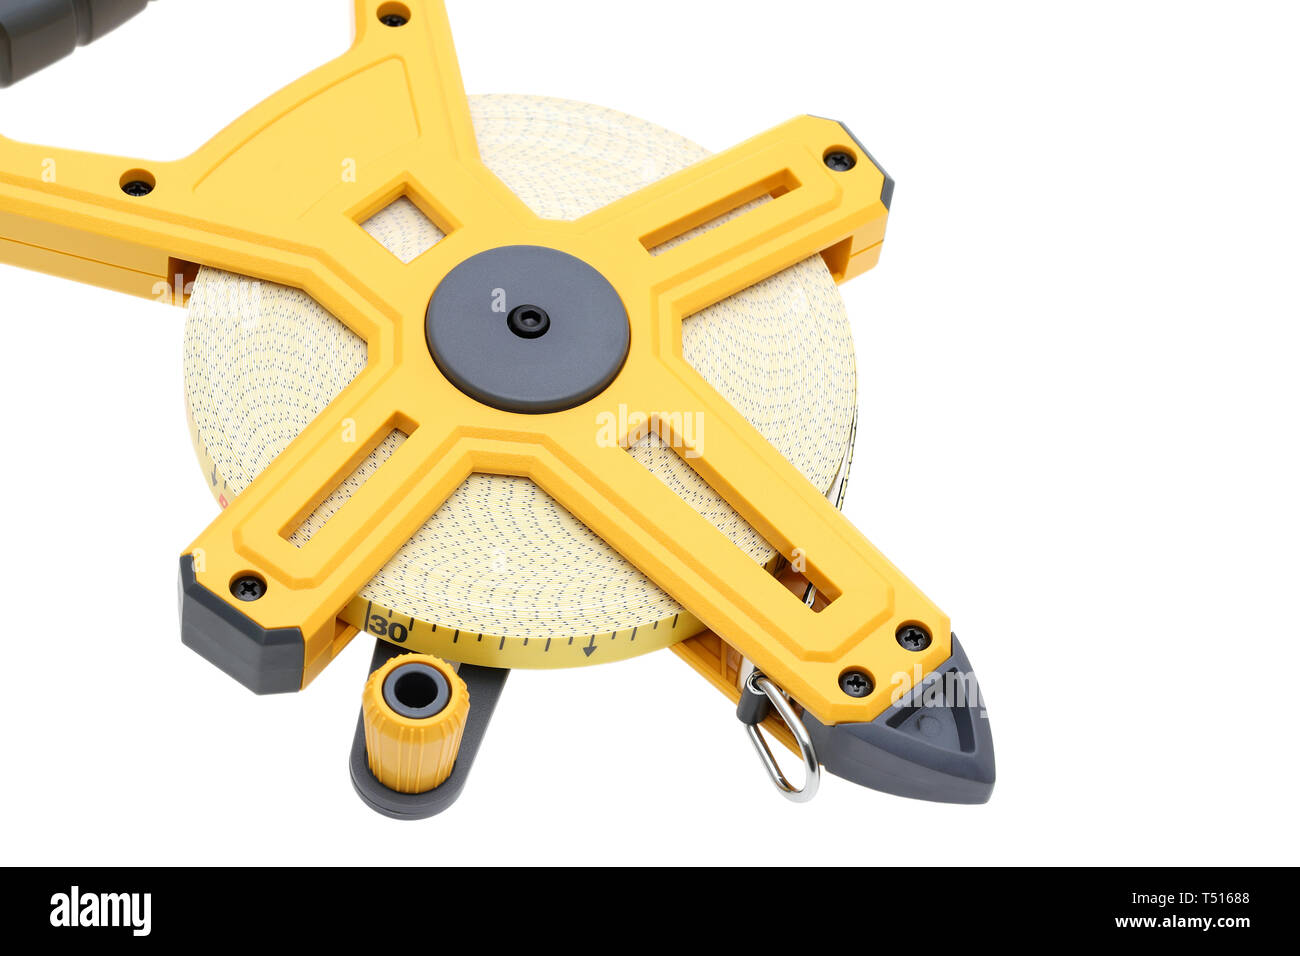 Industrial measuring tape surveying on a white background Stock Photo